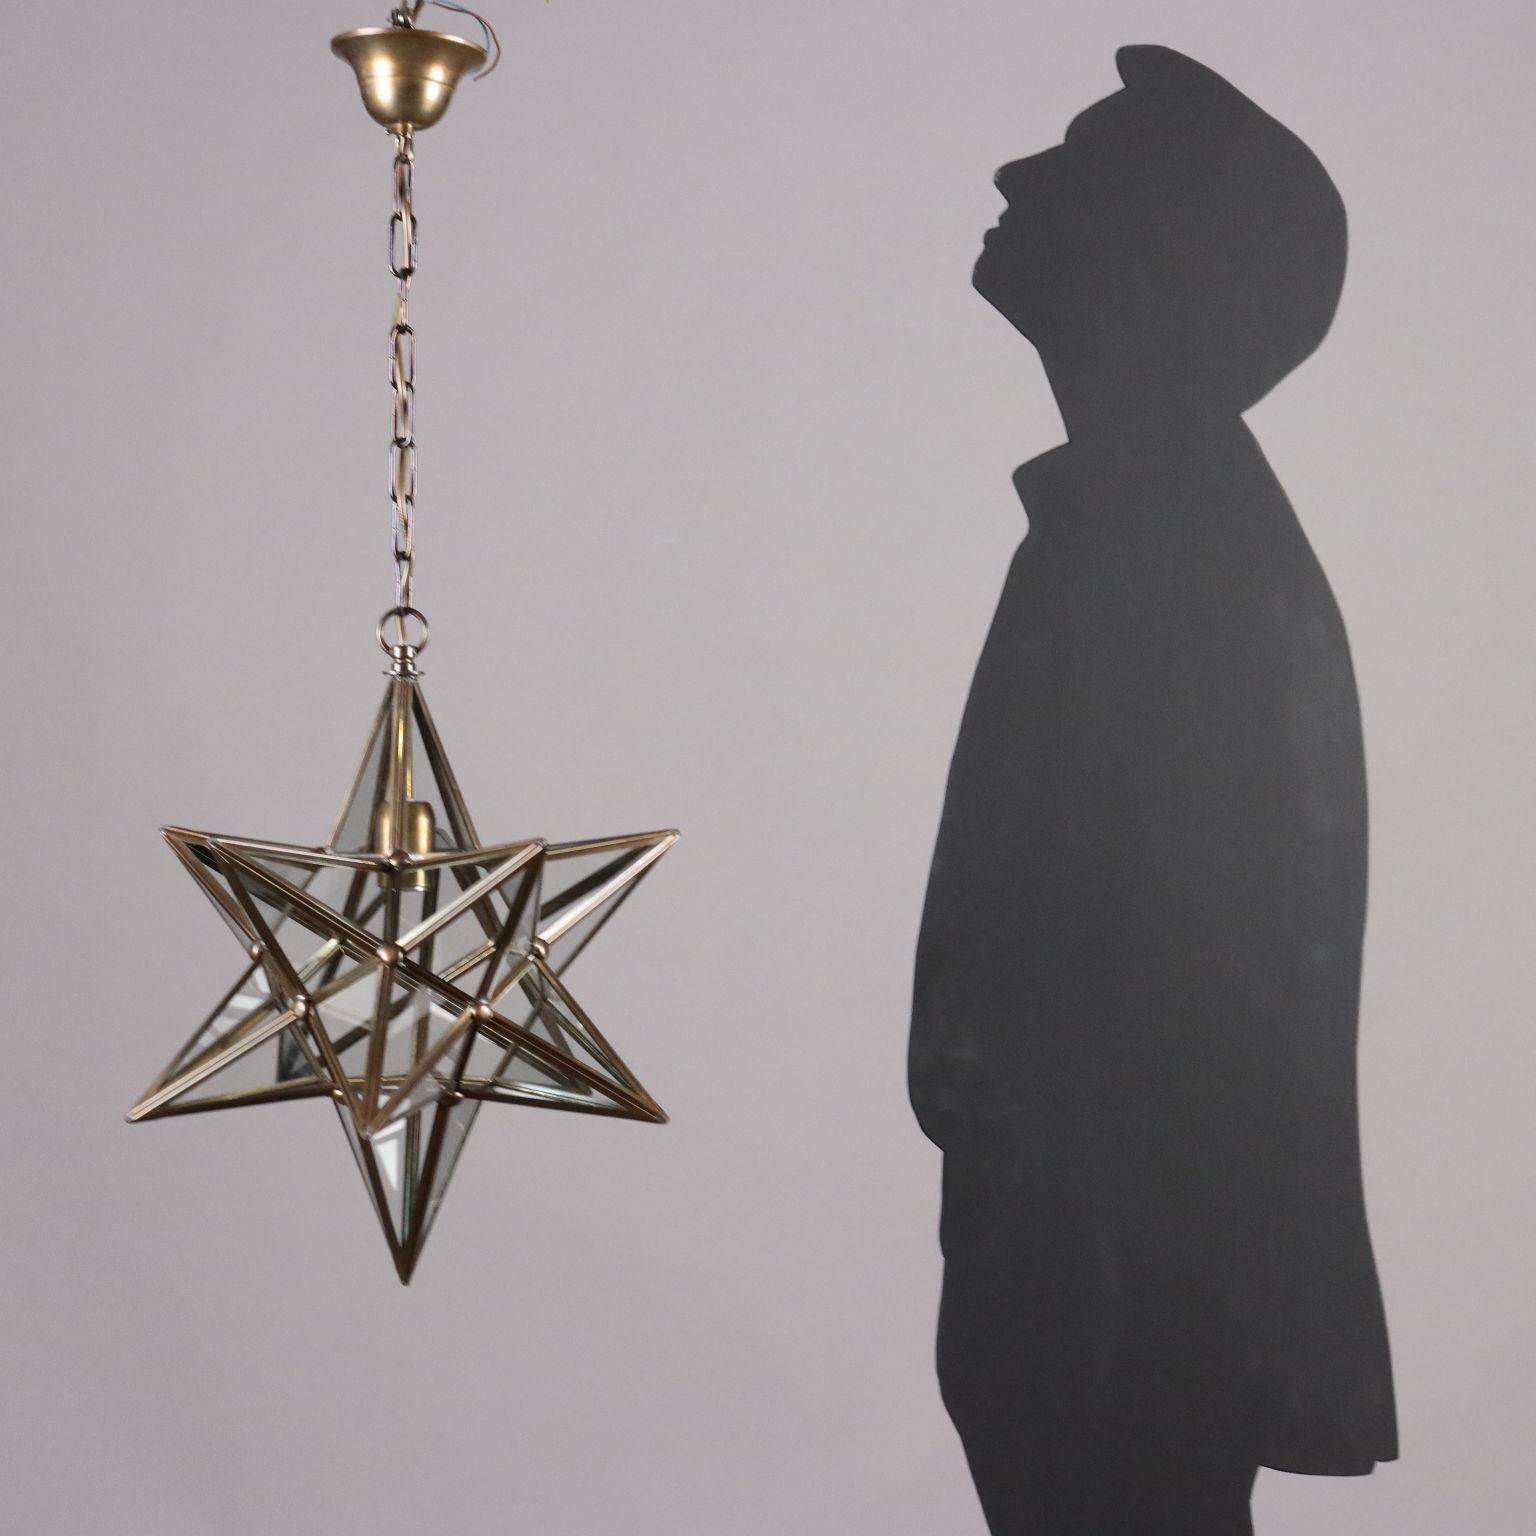 Star-shaped lamp made of brass and glass. Good conditions.